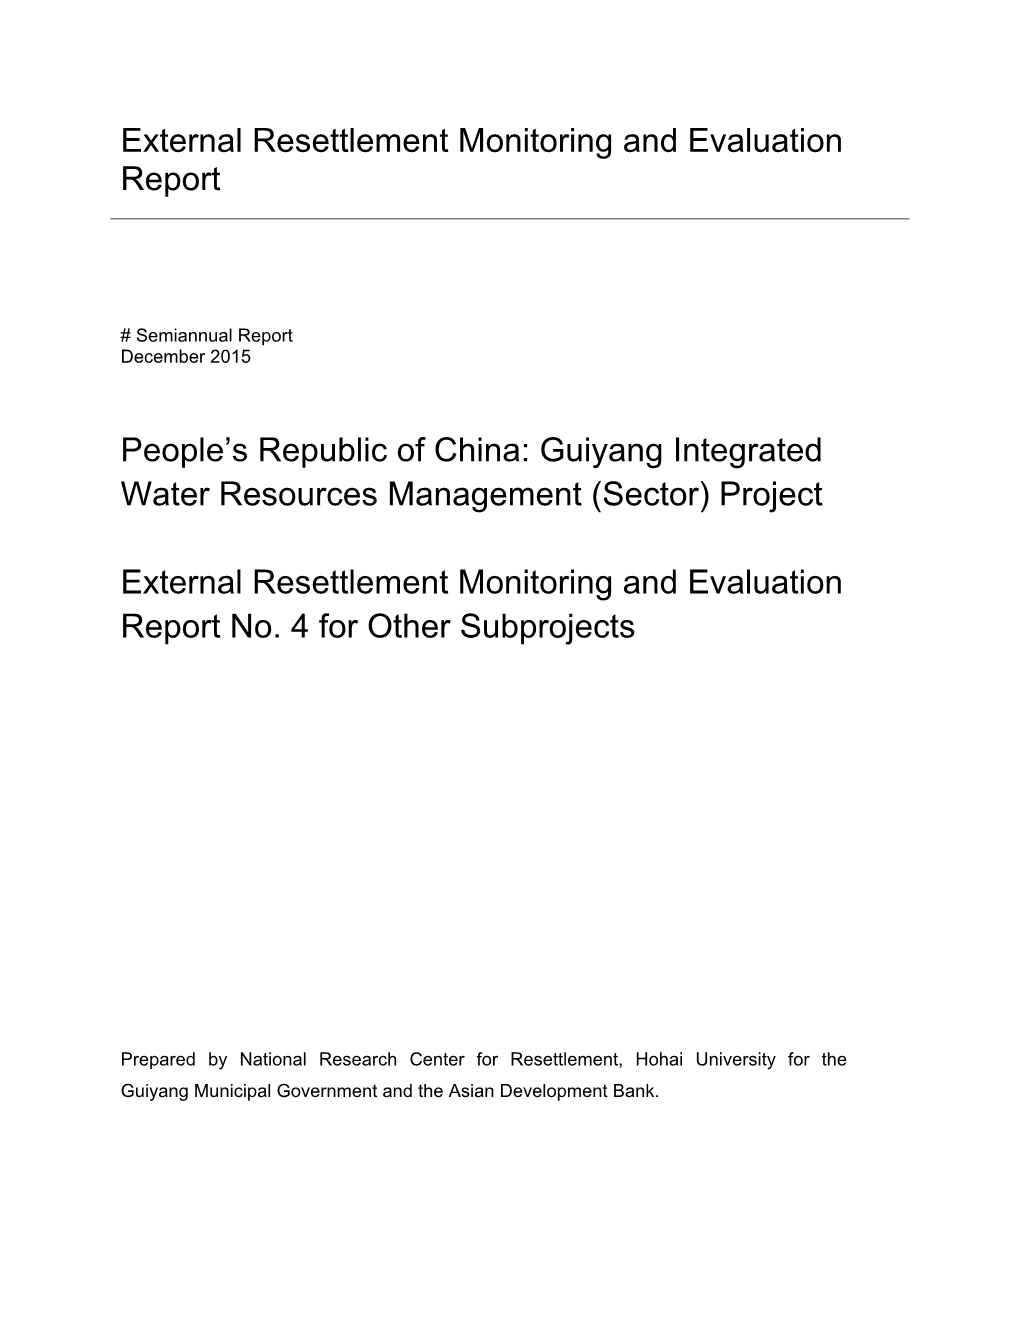 Guiyang Integrated Water Resources Management Sector Project